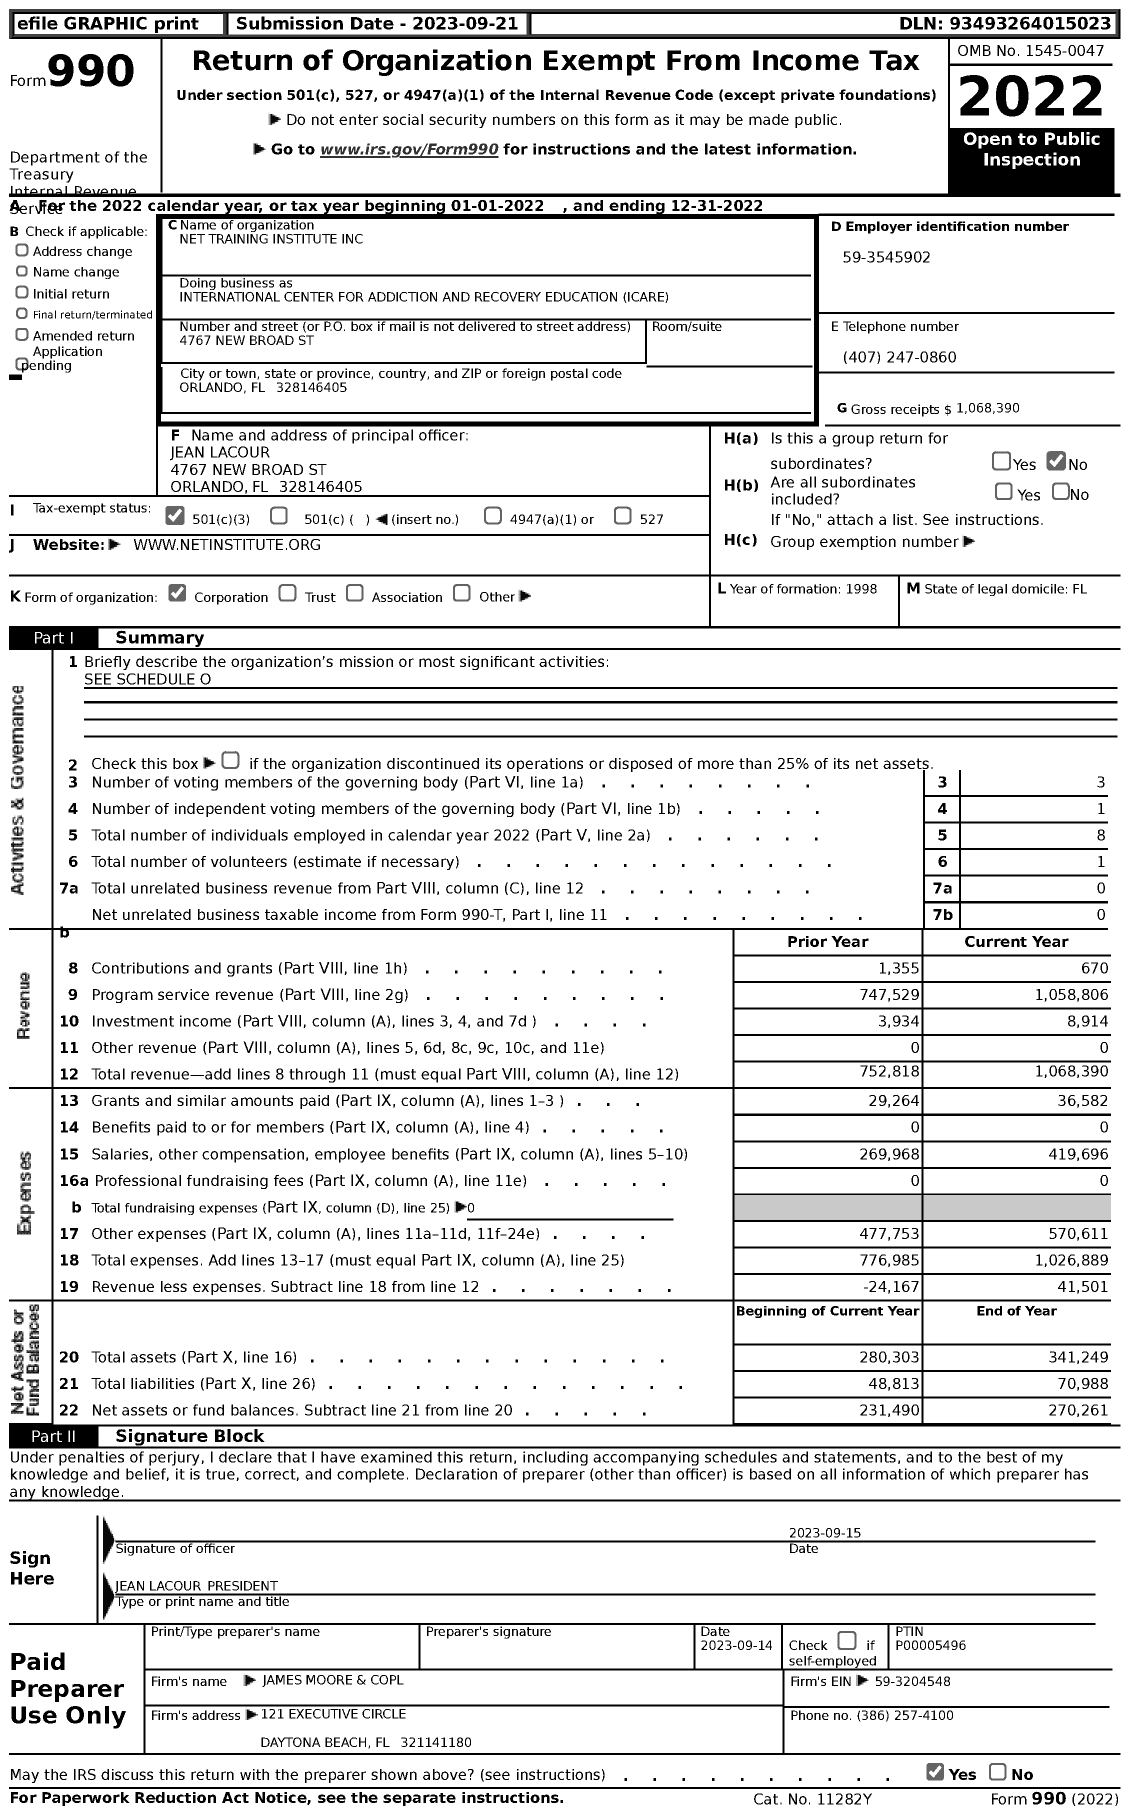 Image of first page of 2022 Form 990 for International Center for Addiction and Recovery Education